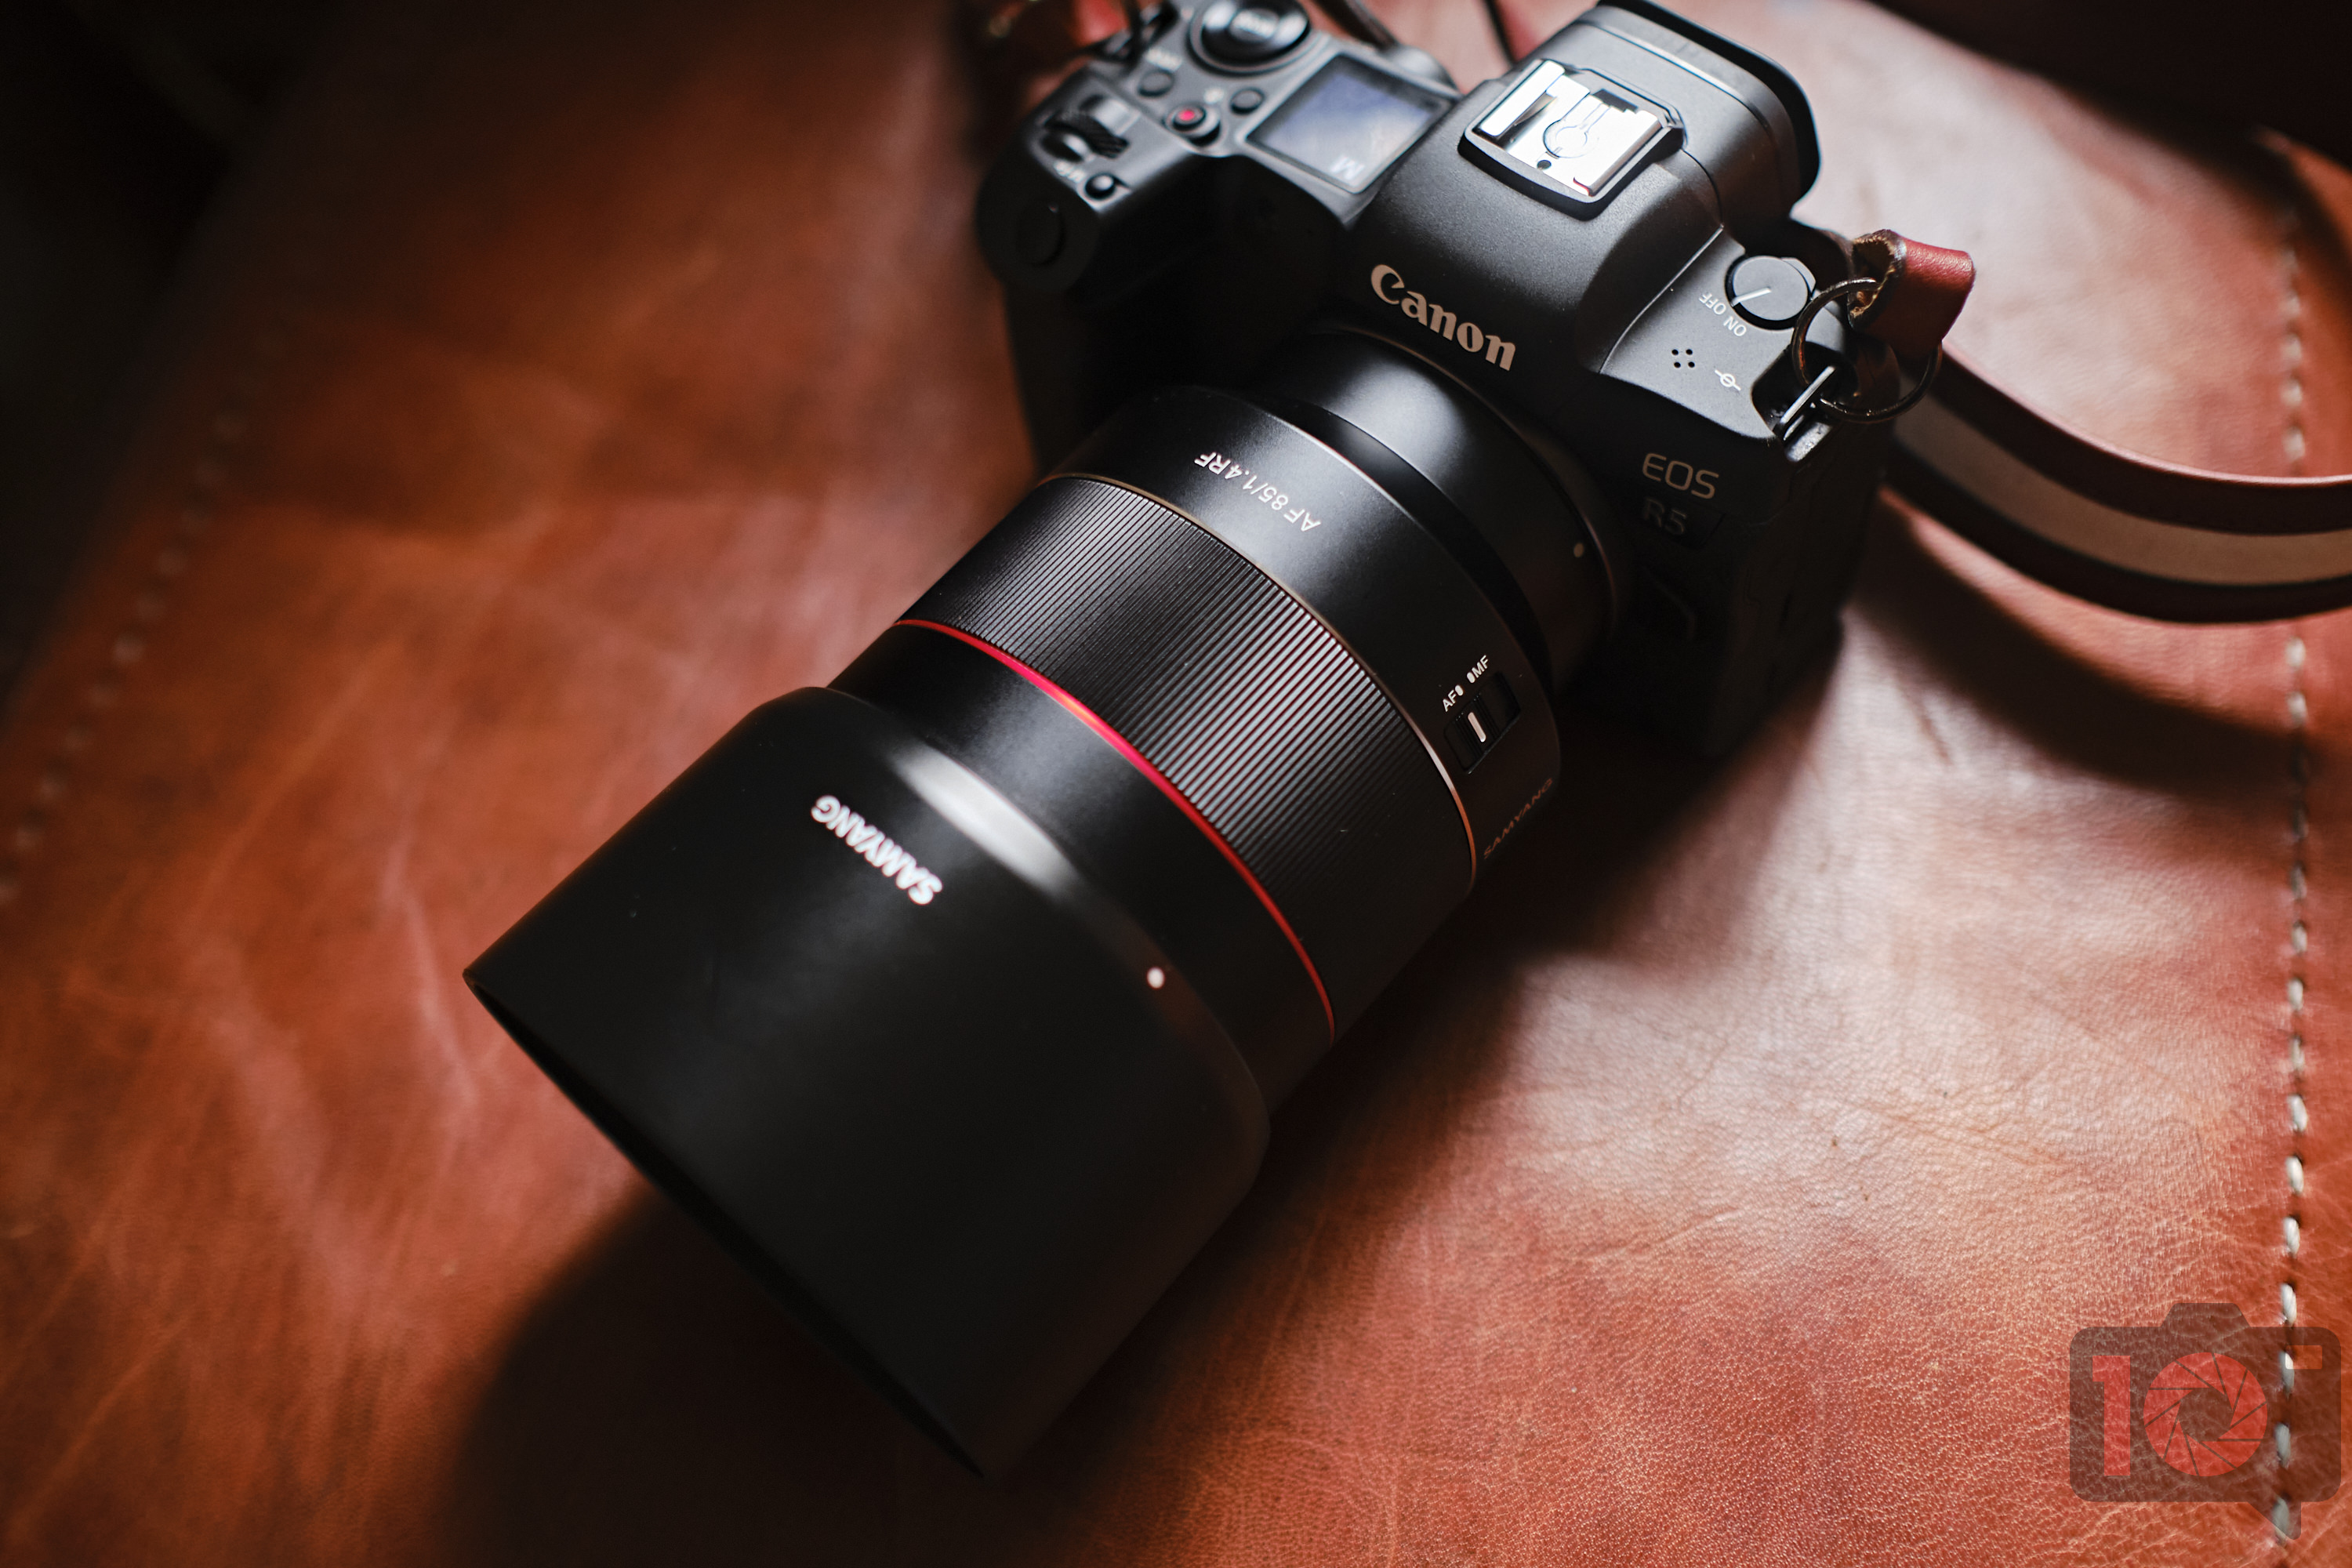 Why Didn’t Canon Make This? Samyang 85mm F1.4 RF Review